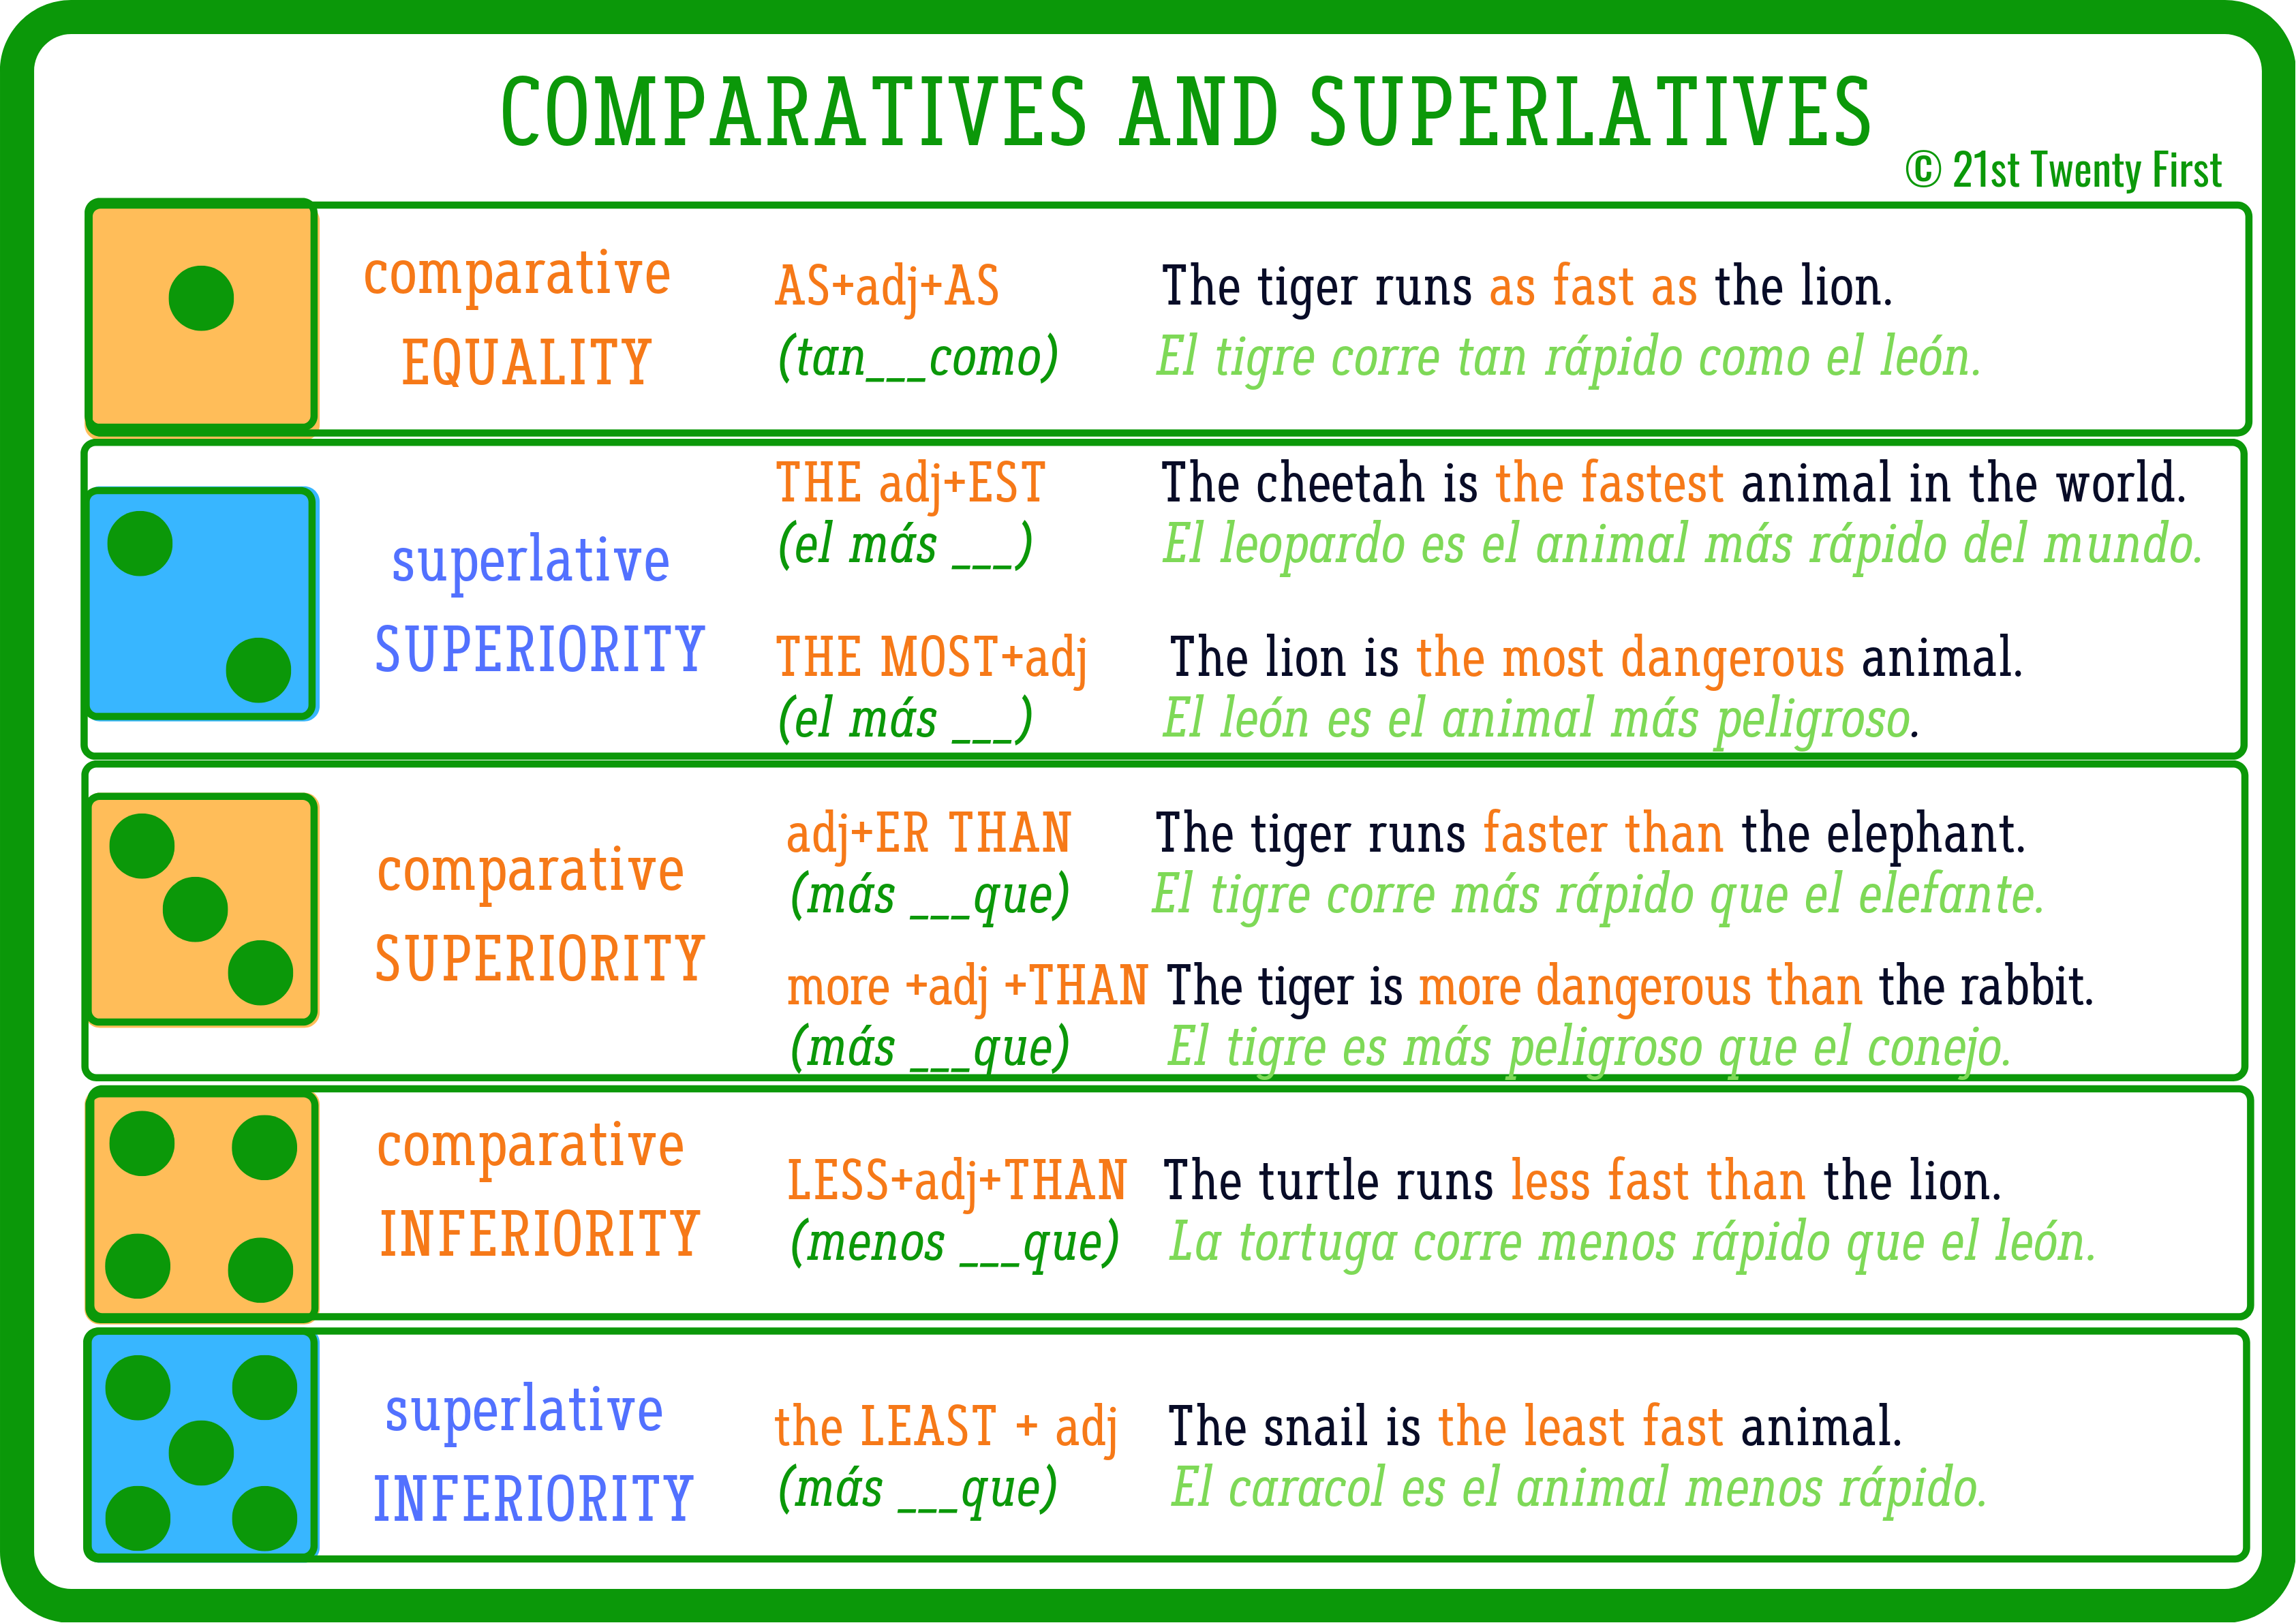 Comparatives and superlatives test. Comparatives and Superlatives исключения. Comparatives and Superlatives правило. Less Comparative and Superlative. Fast Comparative and Superlative.